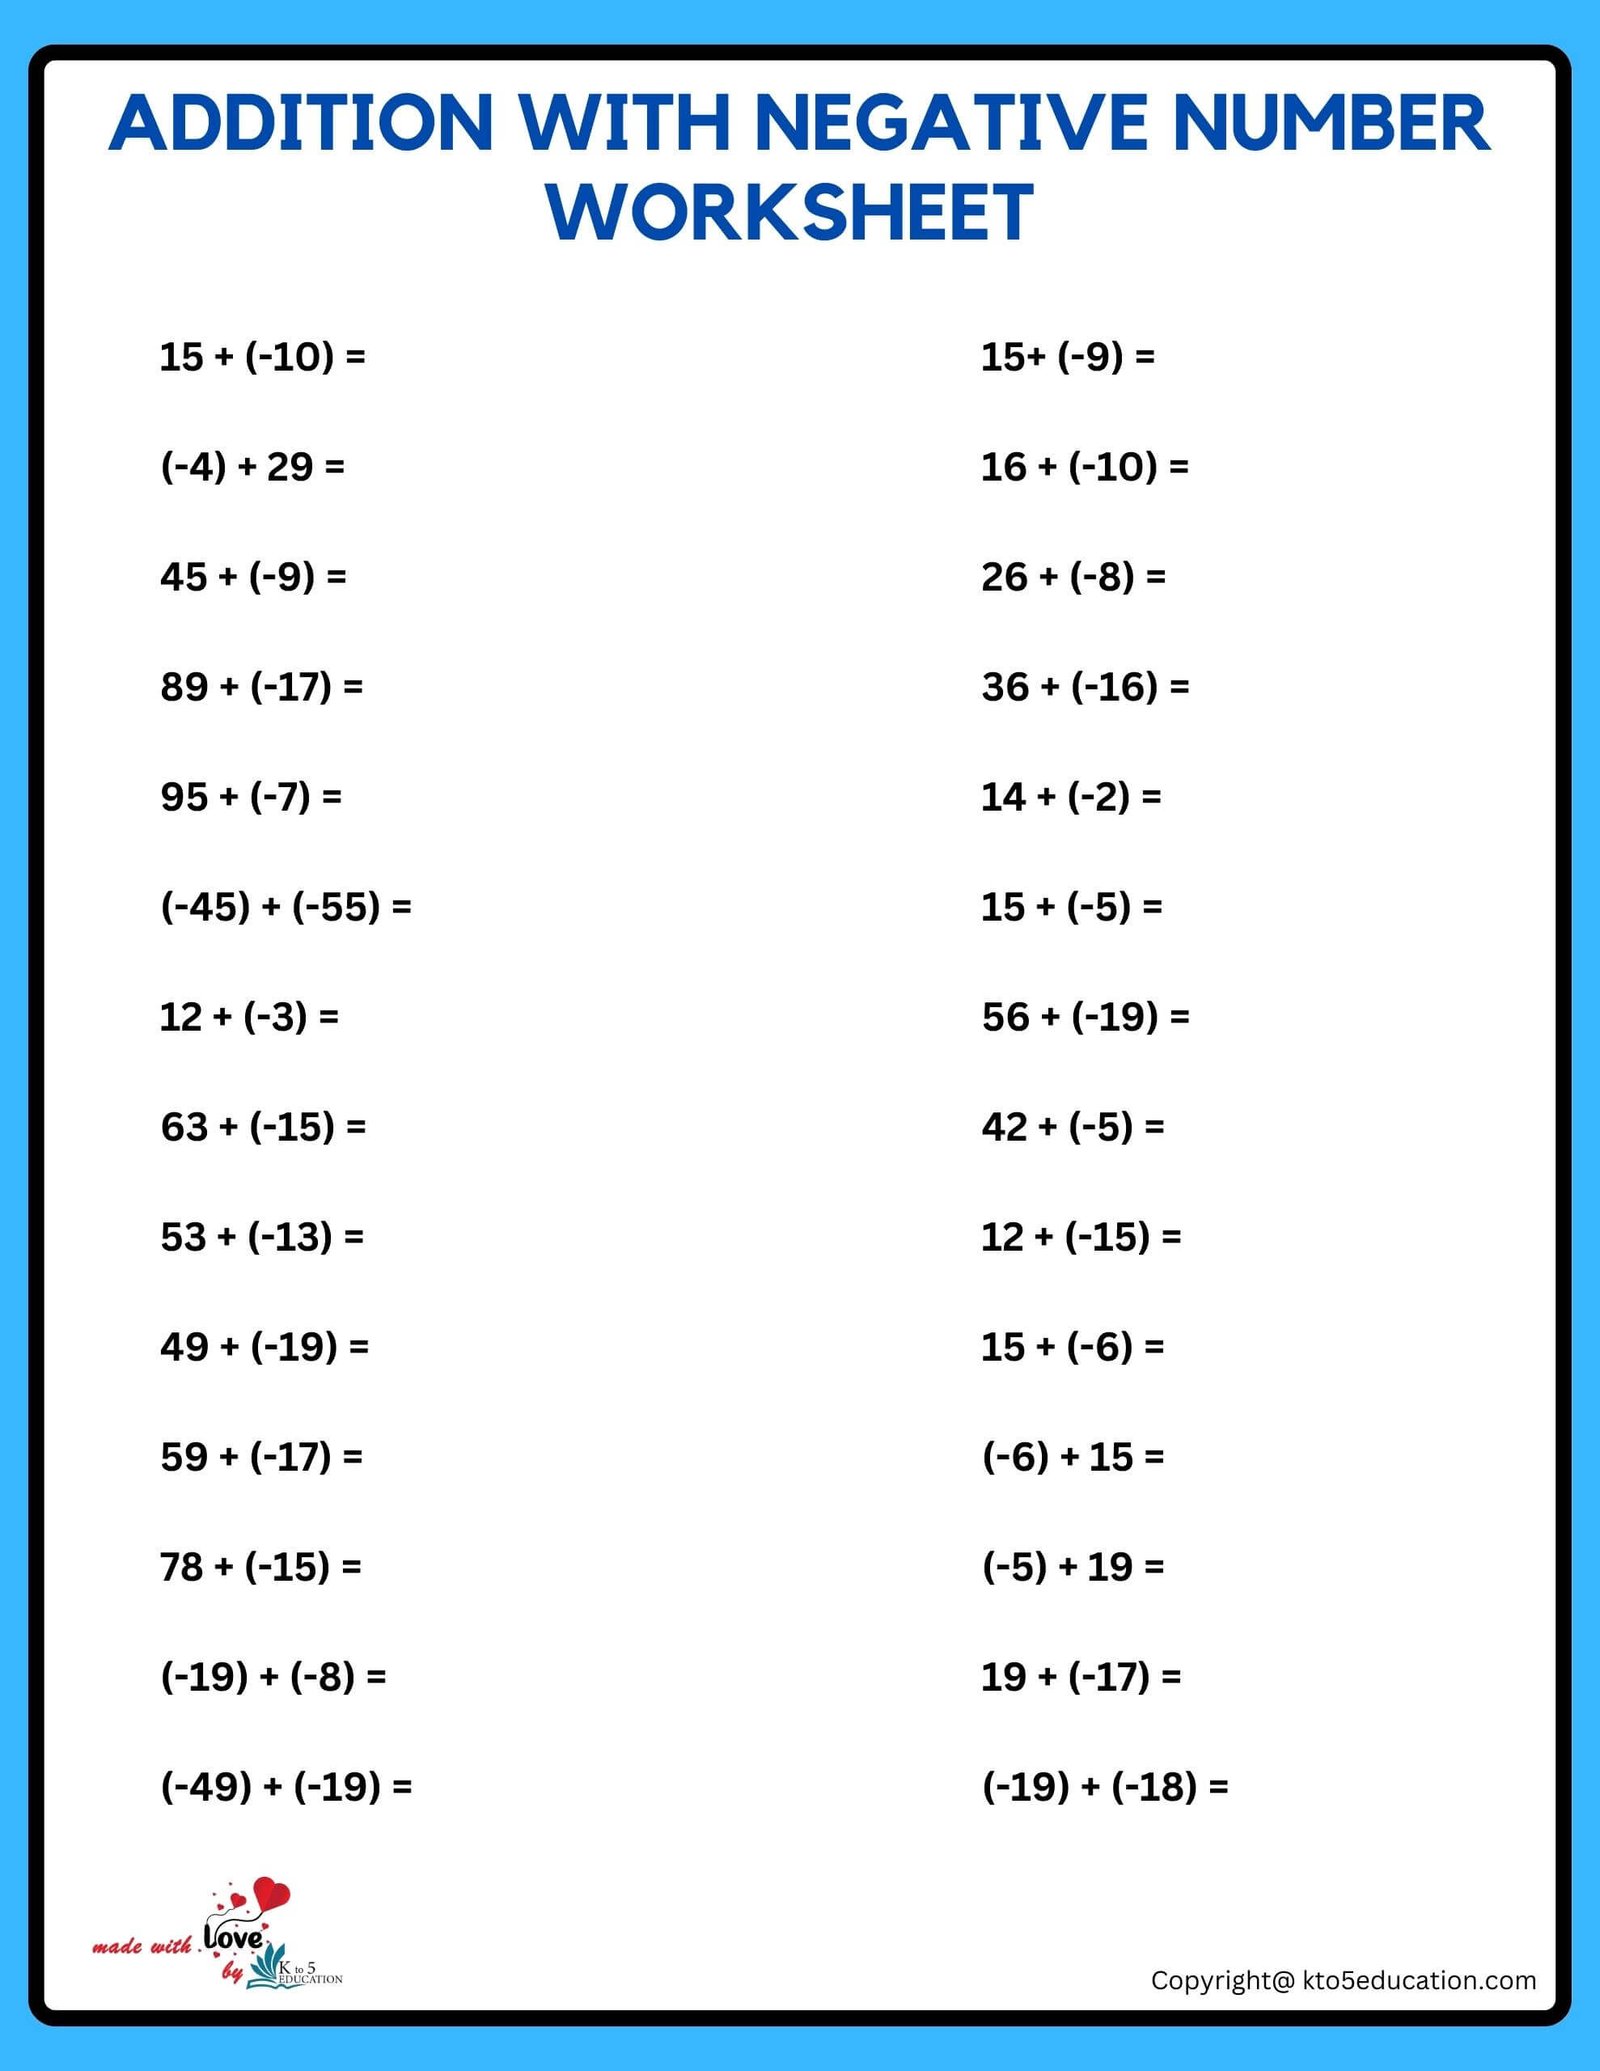 Addition Of Negative And Positive Numbers Worksheets